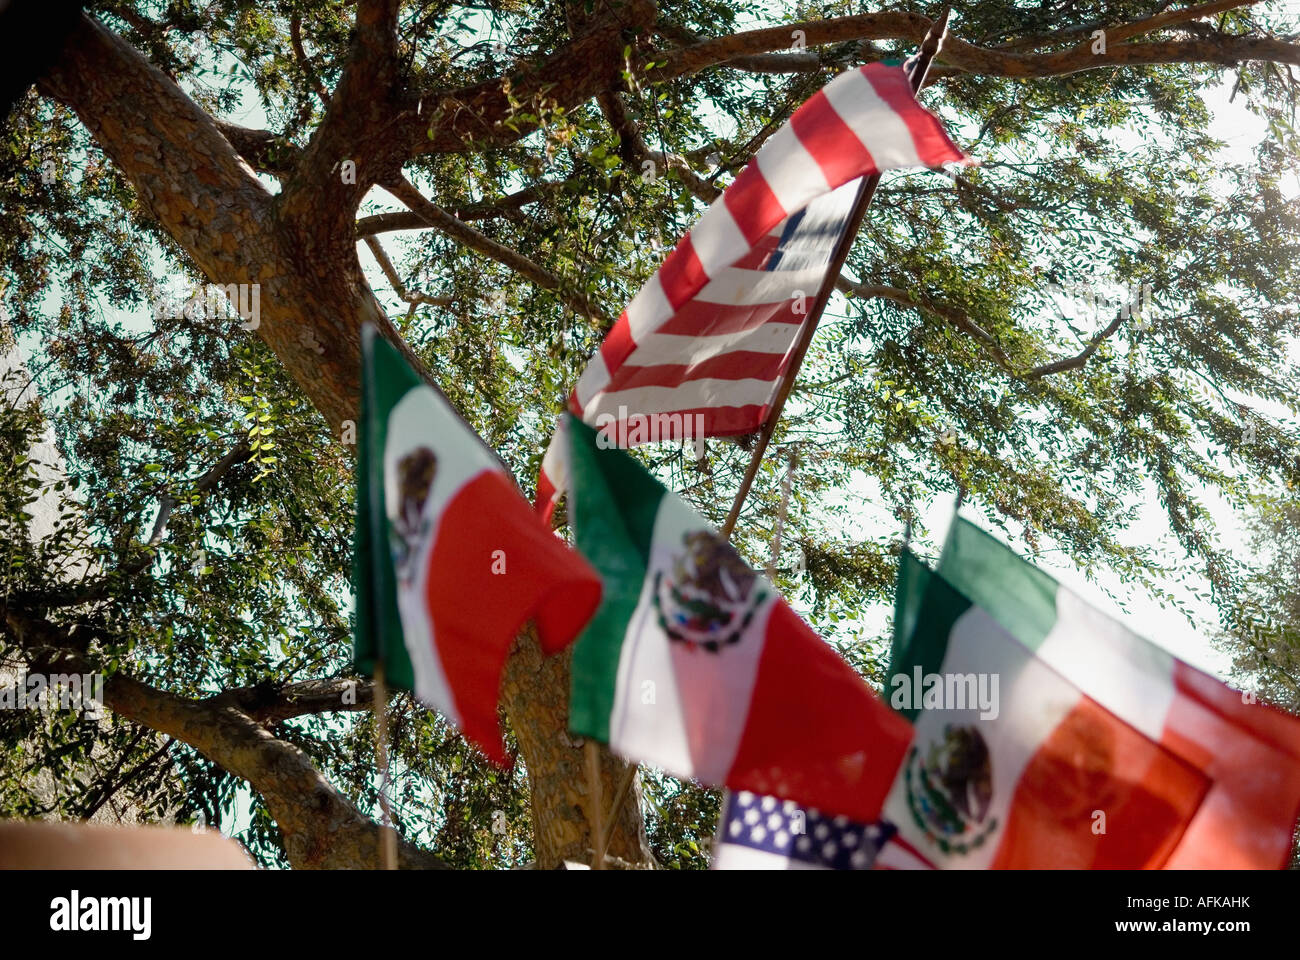 American flags and Mexican flags in front of a tree Stock Photo